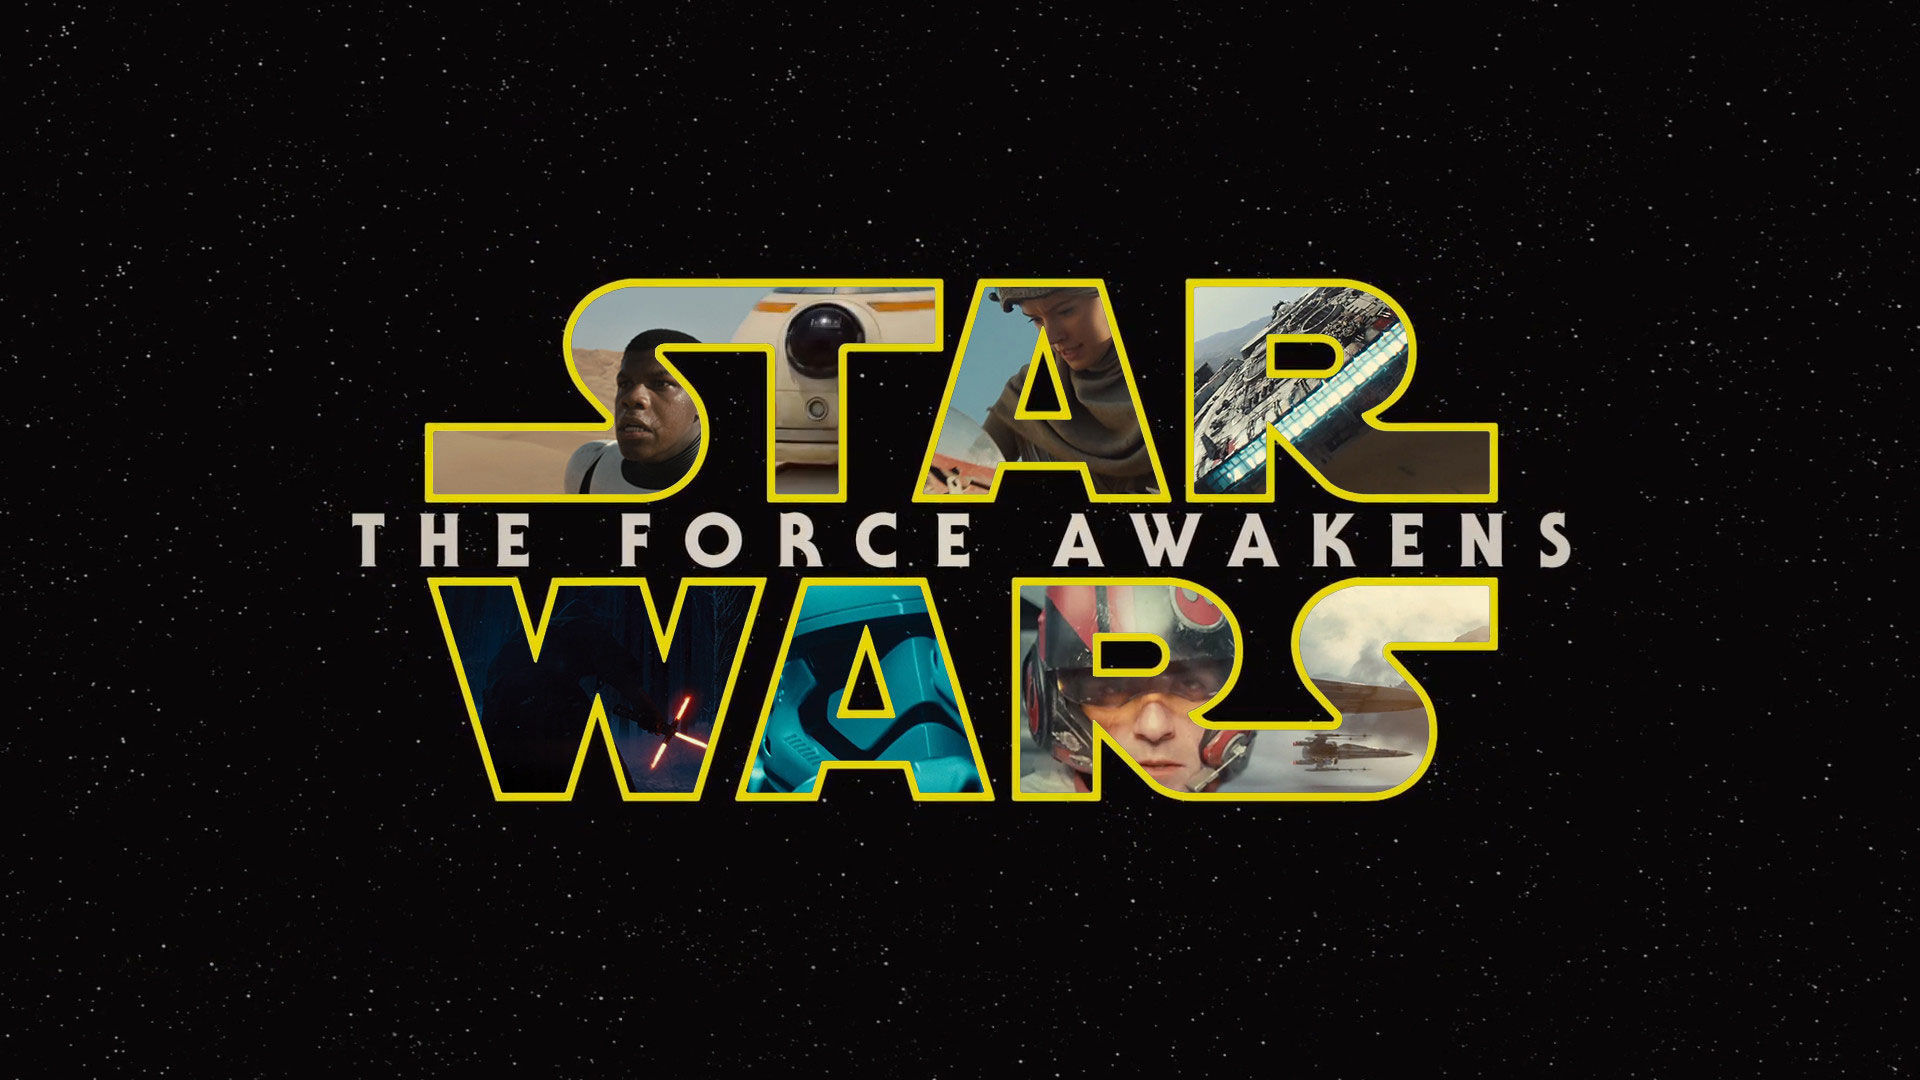 Tlcharger des Wallpapers Star Wars The Force Awakens pour Mobile